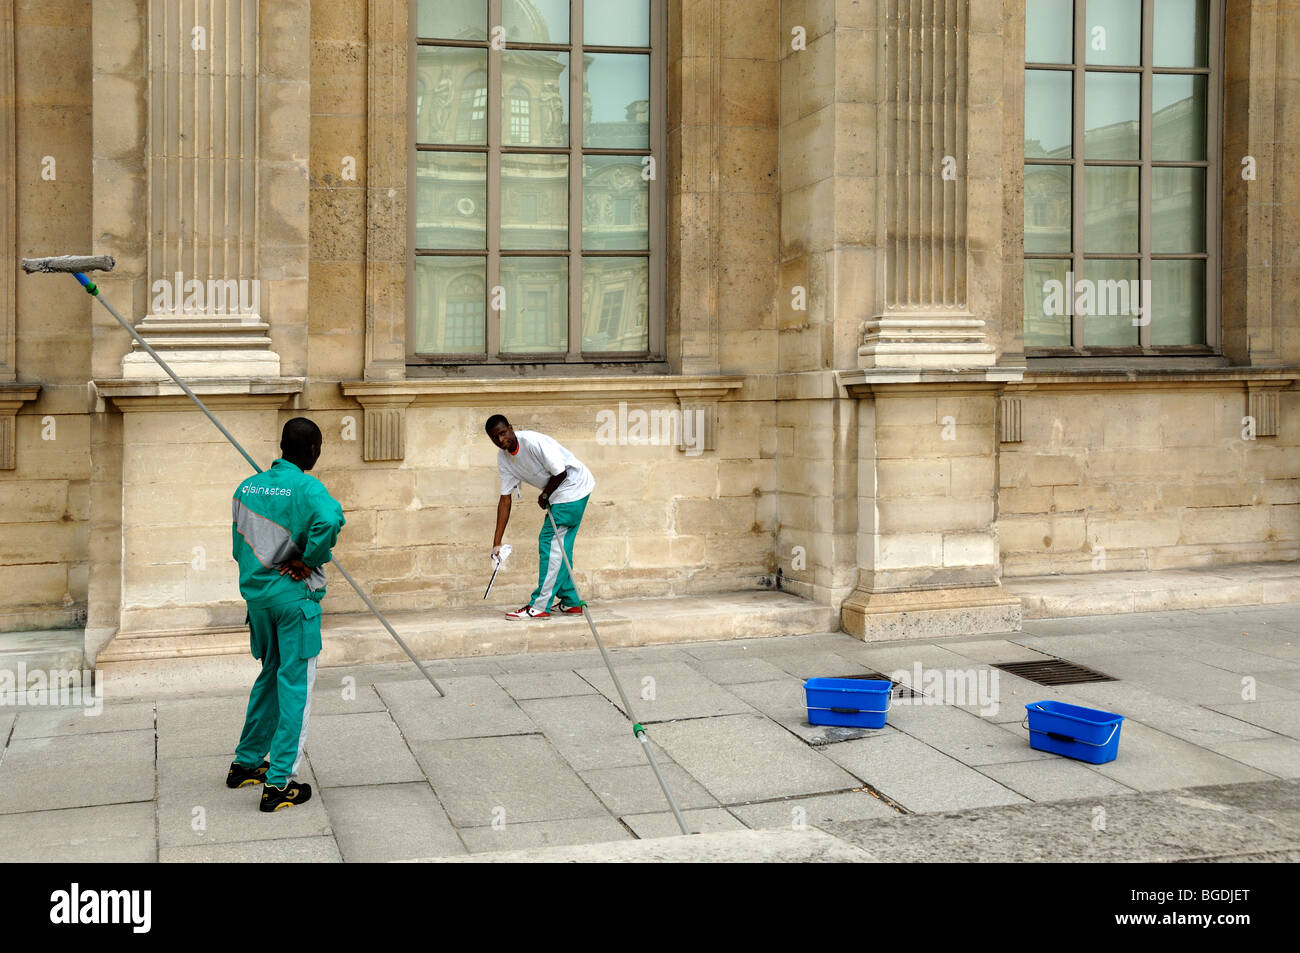 African Immigrant Workers, Foreign Labourers, or Foreigners Cleaning Windows of the Louvre Museum, Paris, France Stock Photo